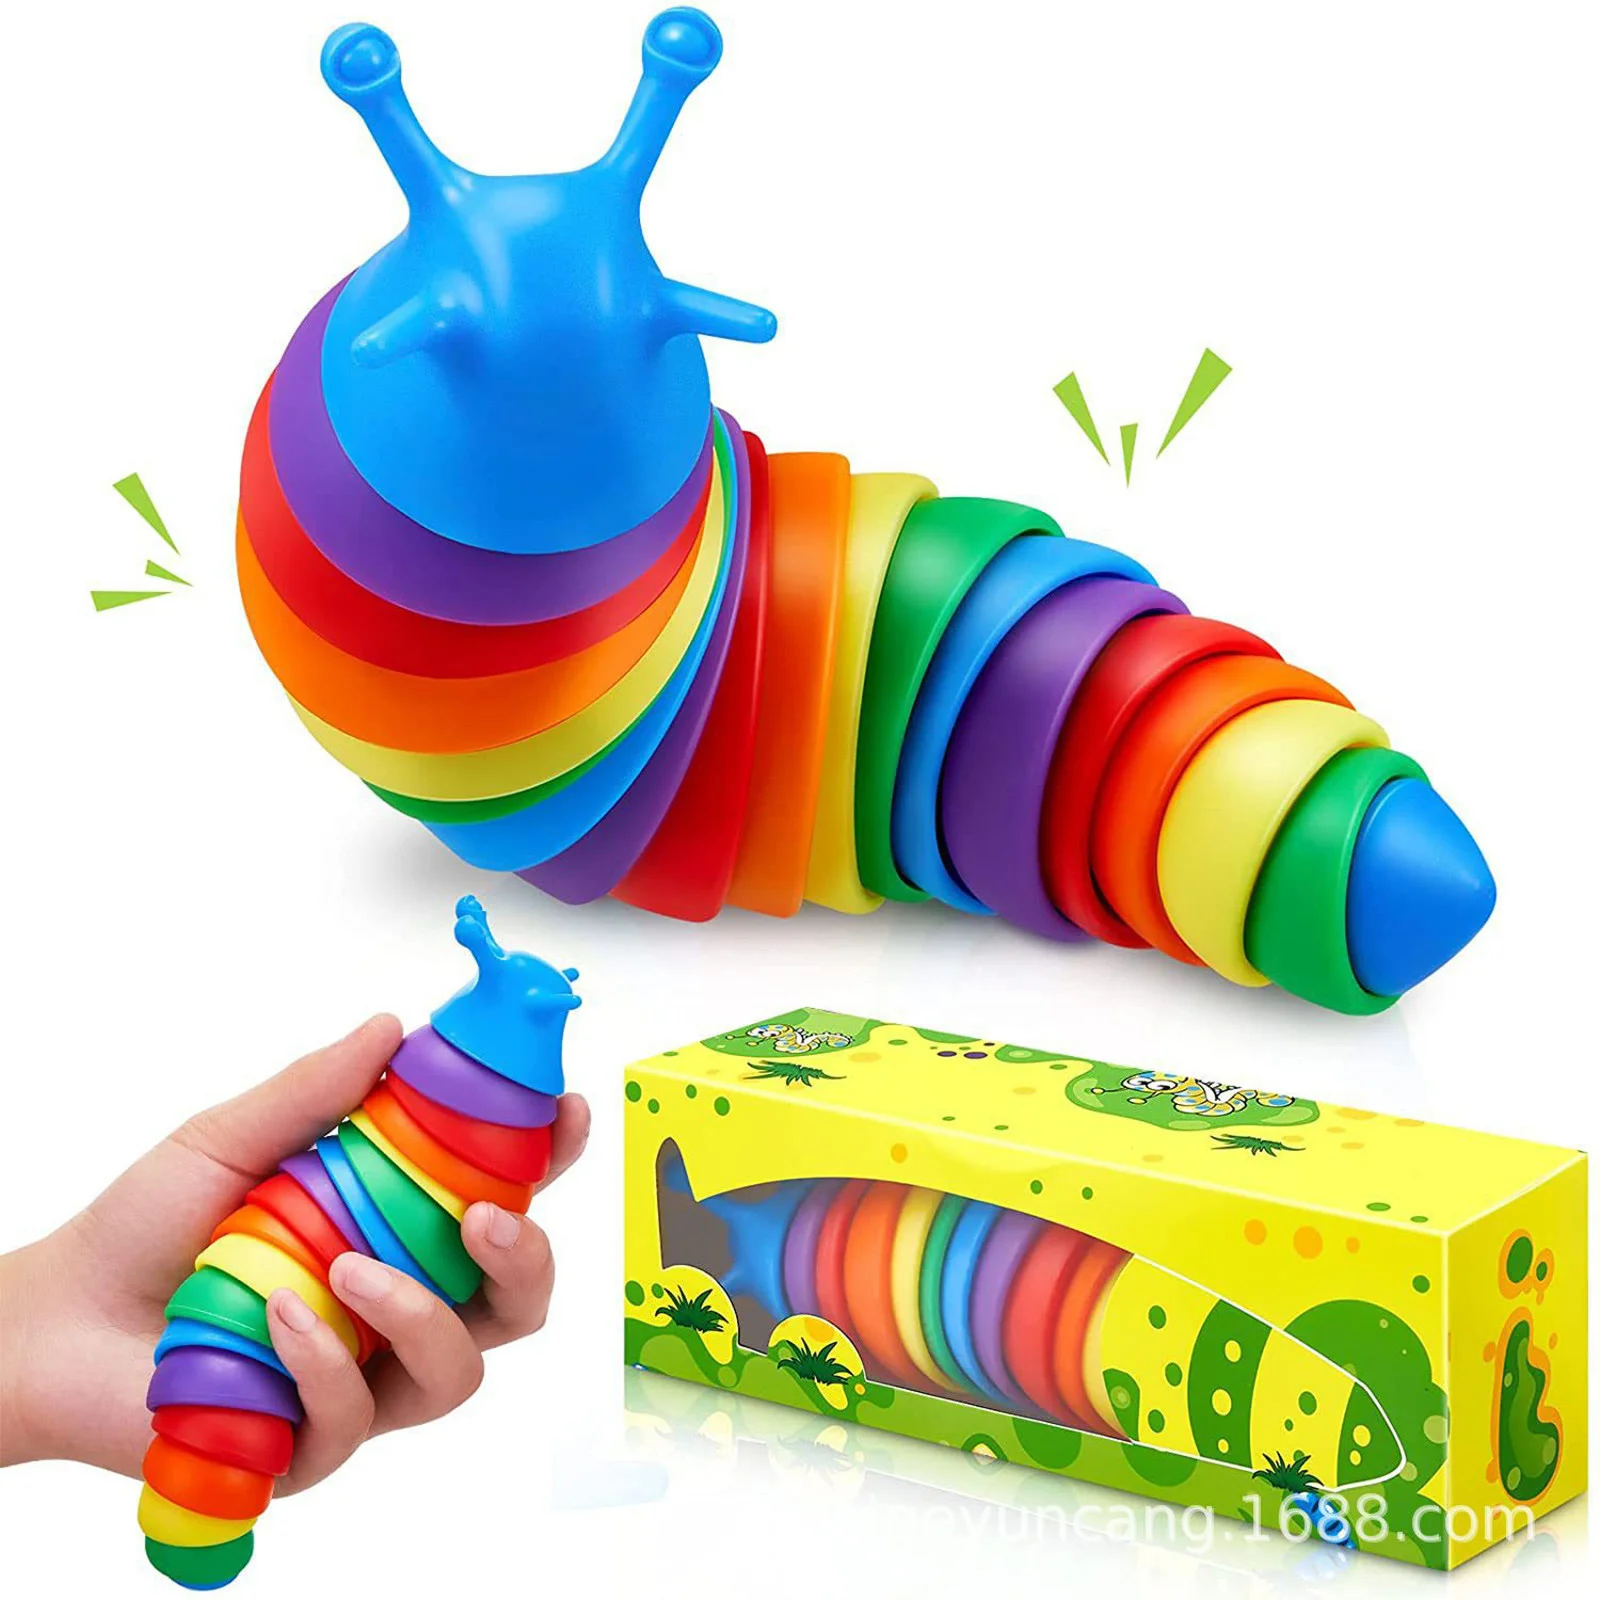 

3D Caterpillar Snail Articulated Fidget Realistic Slug Insects Antistress Fun Crawling Sensory Toy For Kids Adult